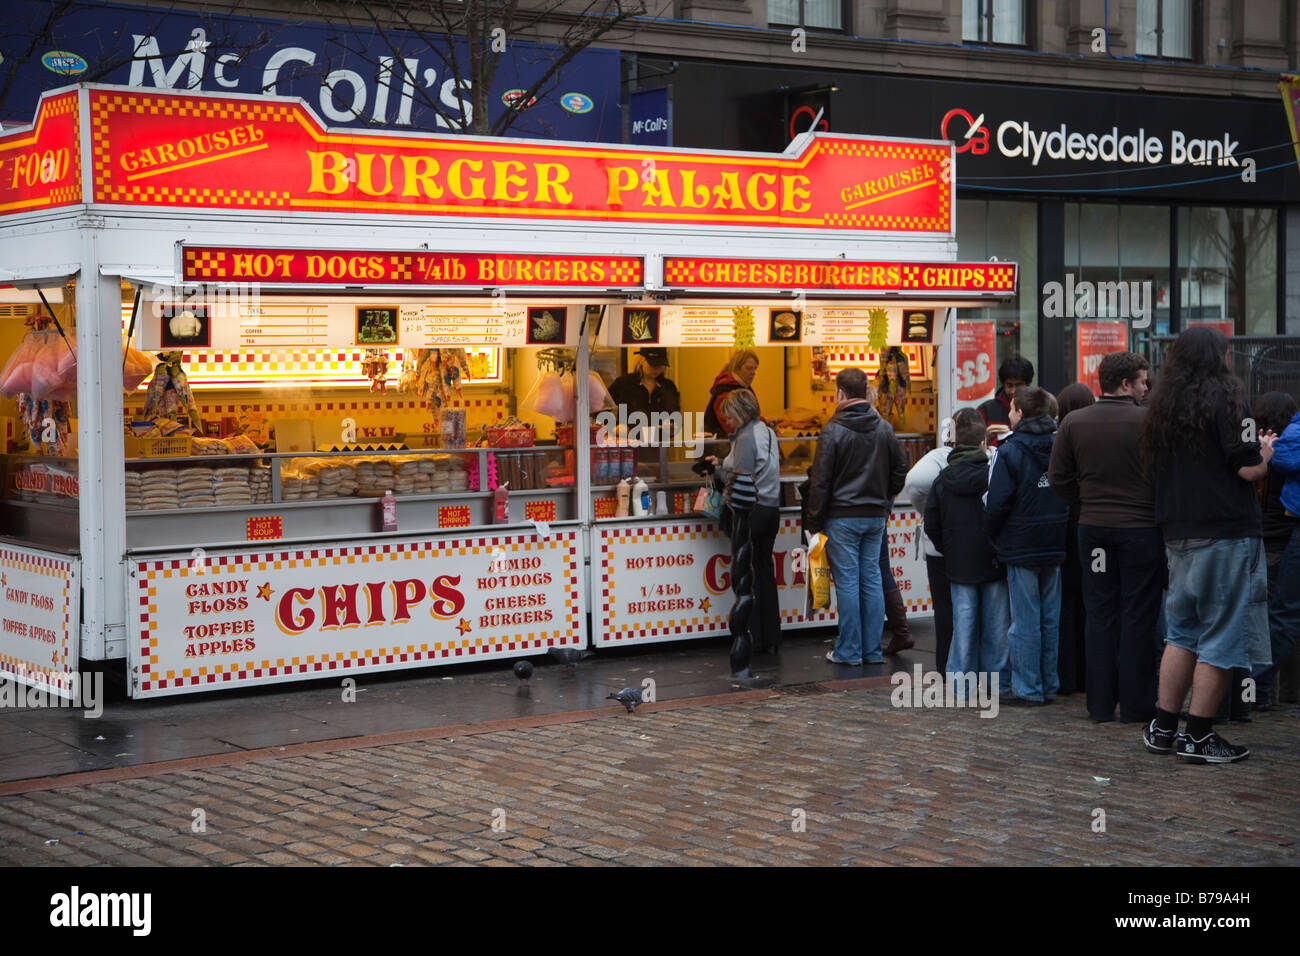 Queue for food & drink. Chips for Sale The Burger Palace a Mobile Snack Van or takeaway, Dundee, Scotland, UK Stock Photo